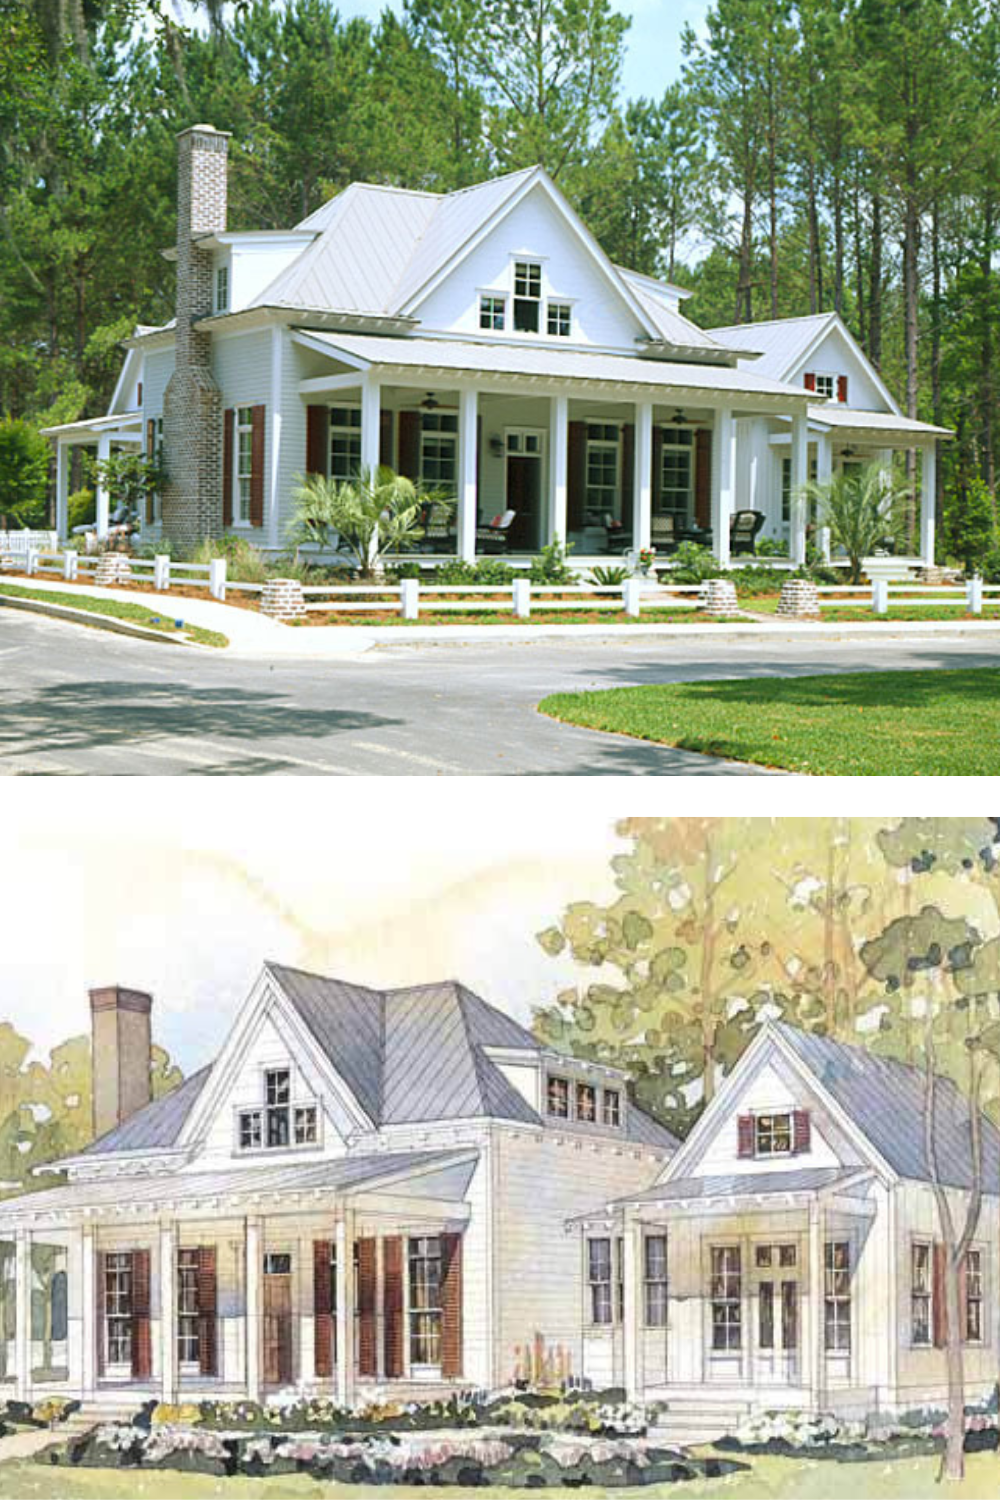 10 Best Southern Living House Plans; here are the most popular house plans southern living produced that you need to see!